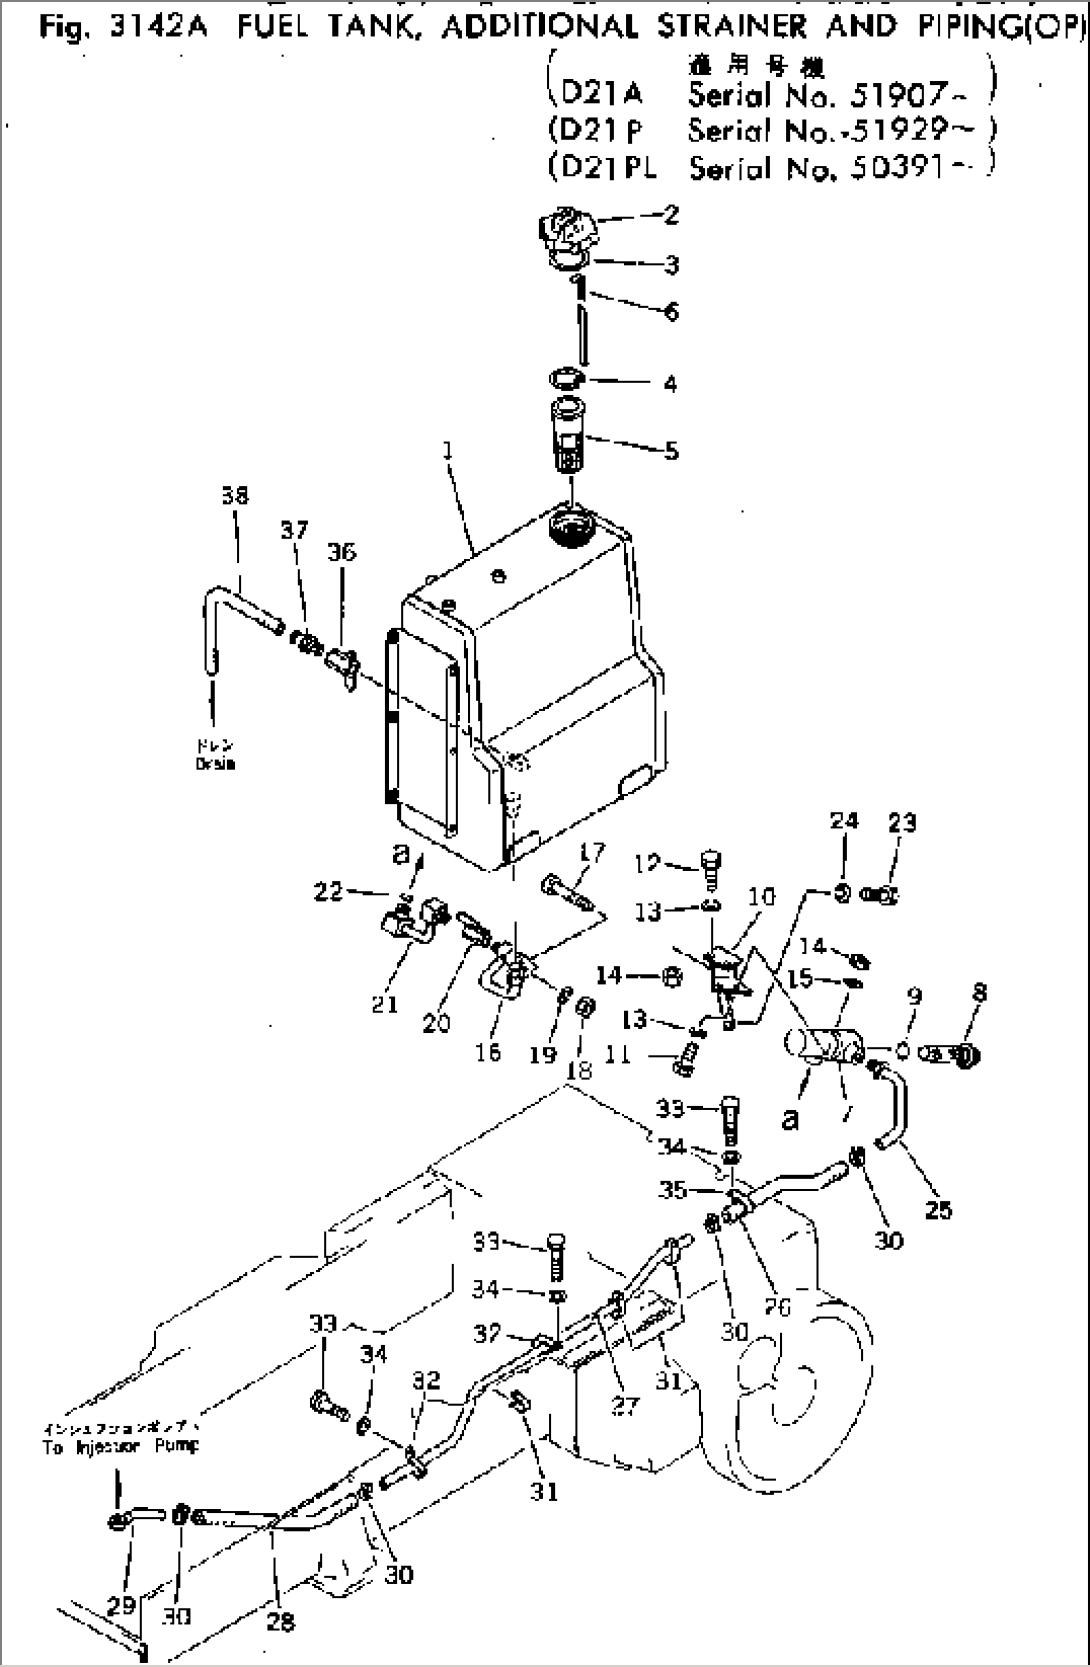 FUEL TANK¤ ADDITIONAL STRAINER AND PIPING(#51907-)